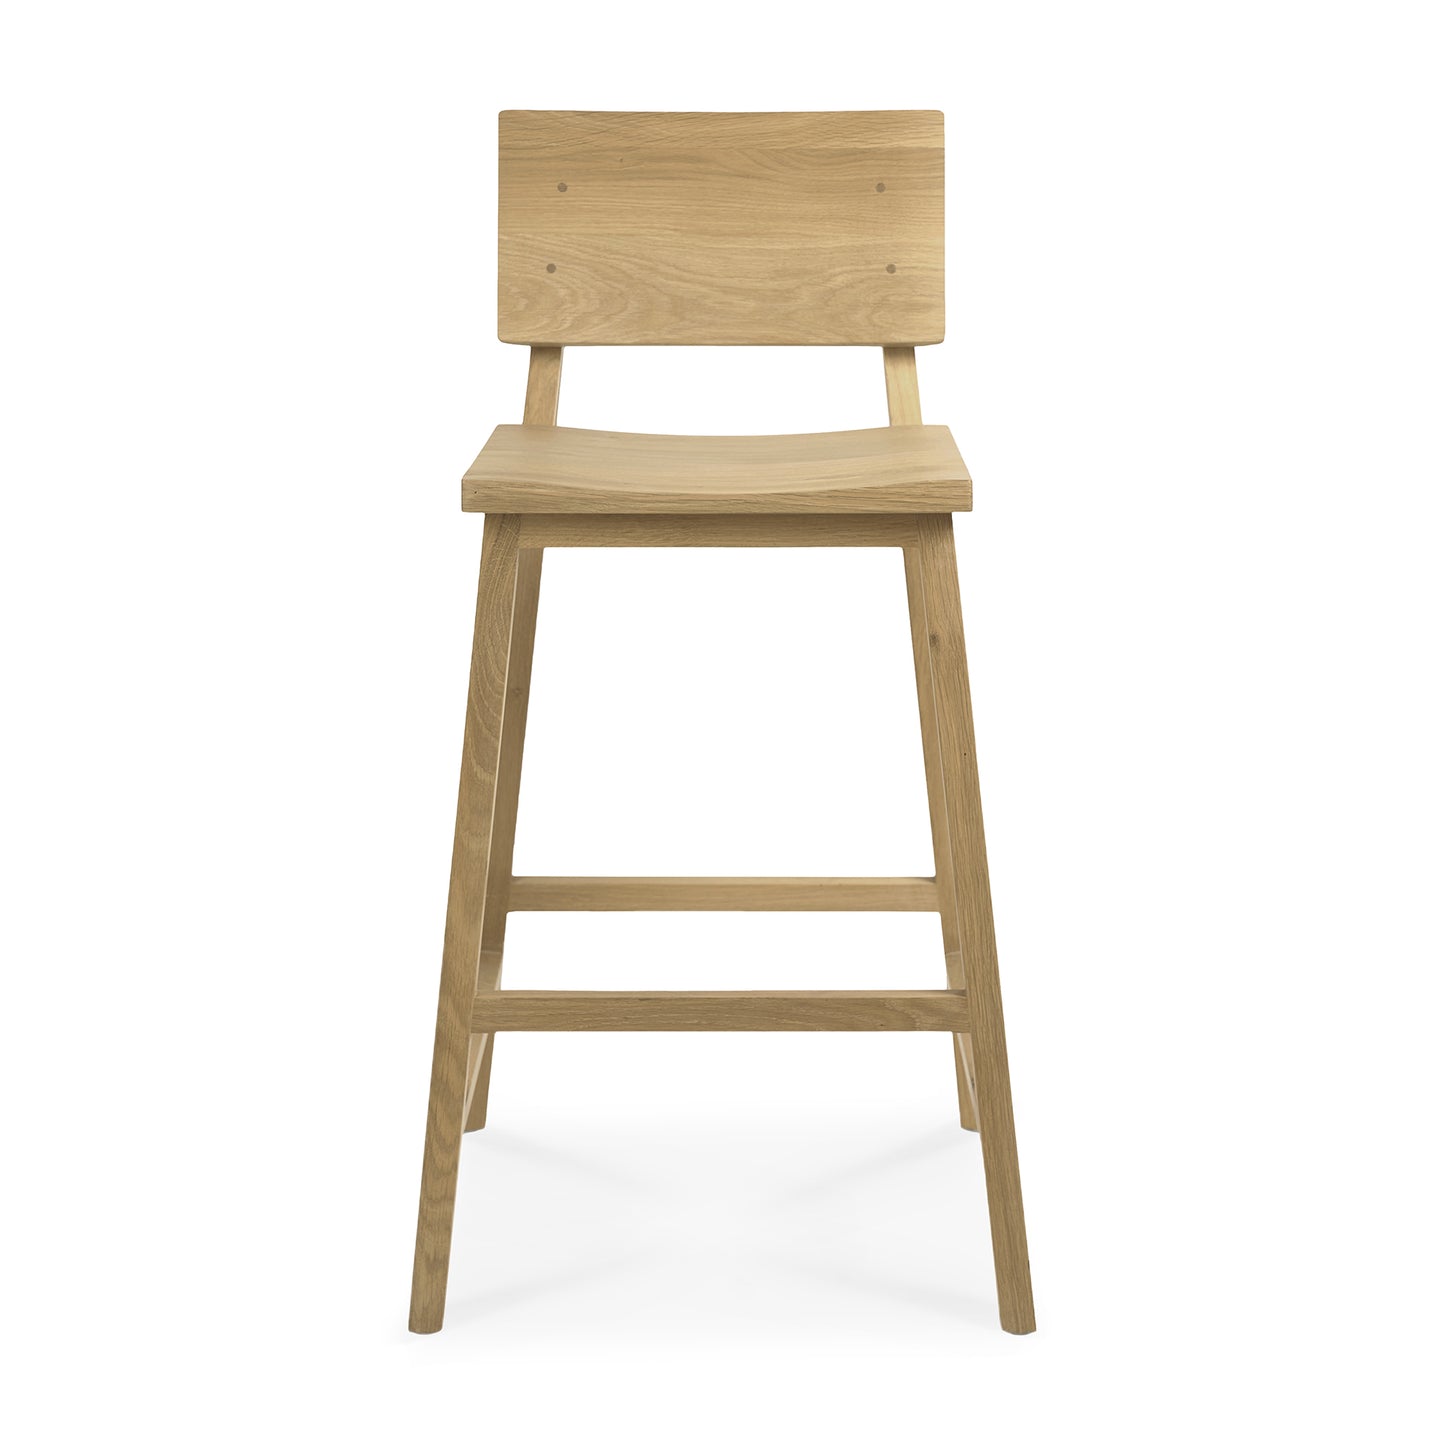 Ethnicraft Oak N3 Kitchen Counter Barstool is available from Make Your House A Home, Bendigo, Victoria, Australia